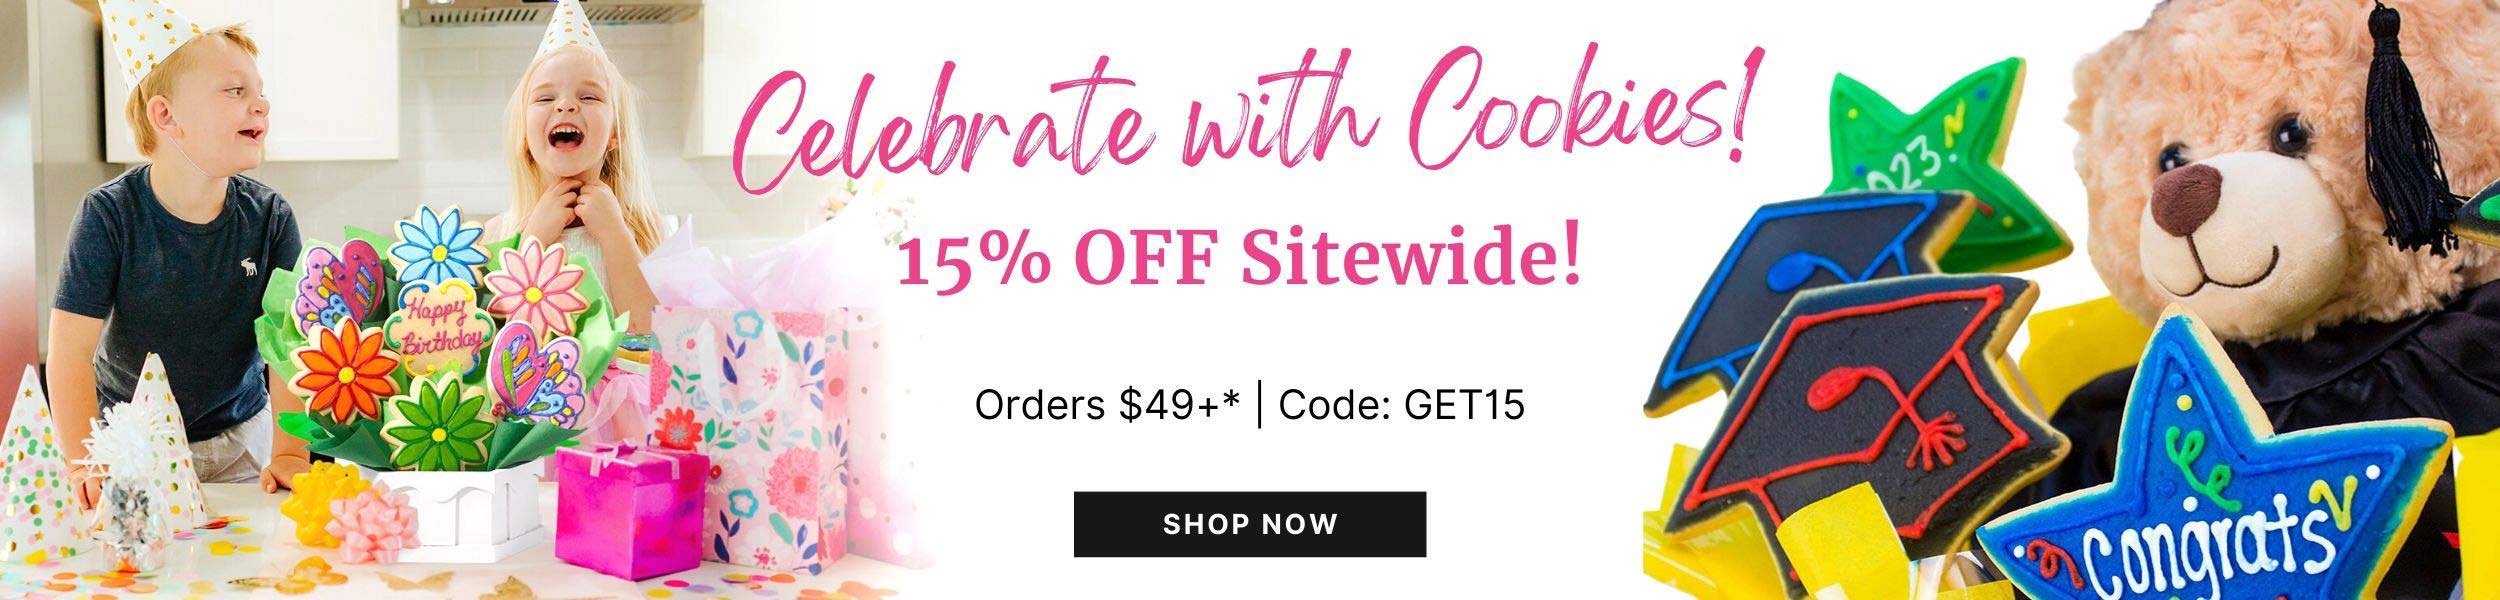 Celebrate Sitewide Offer